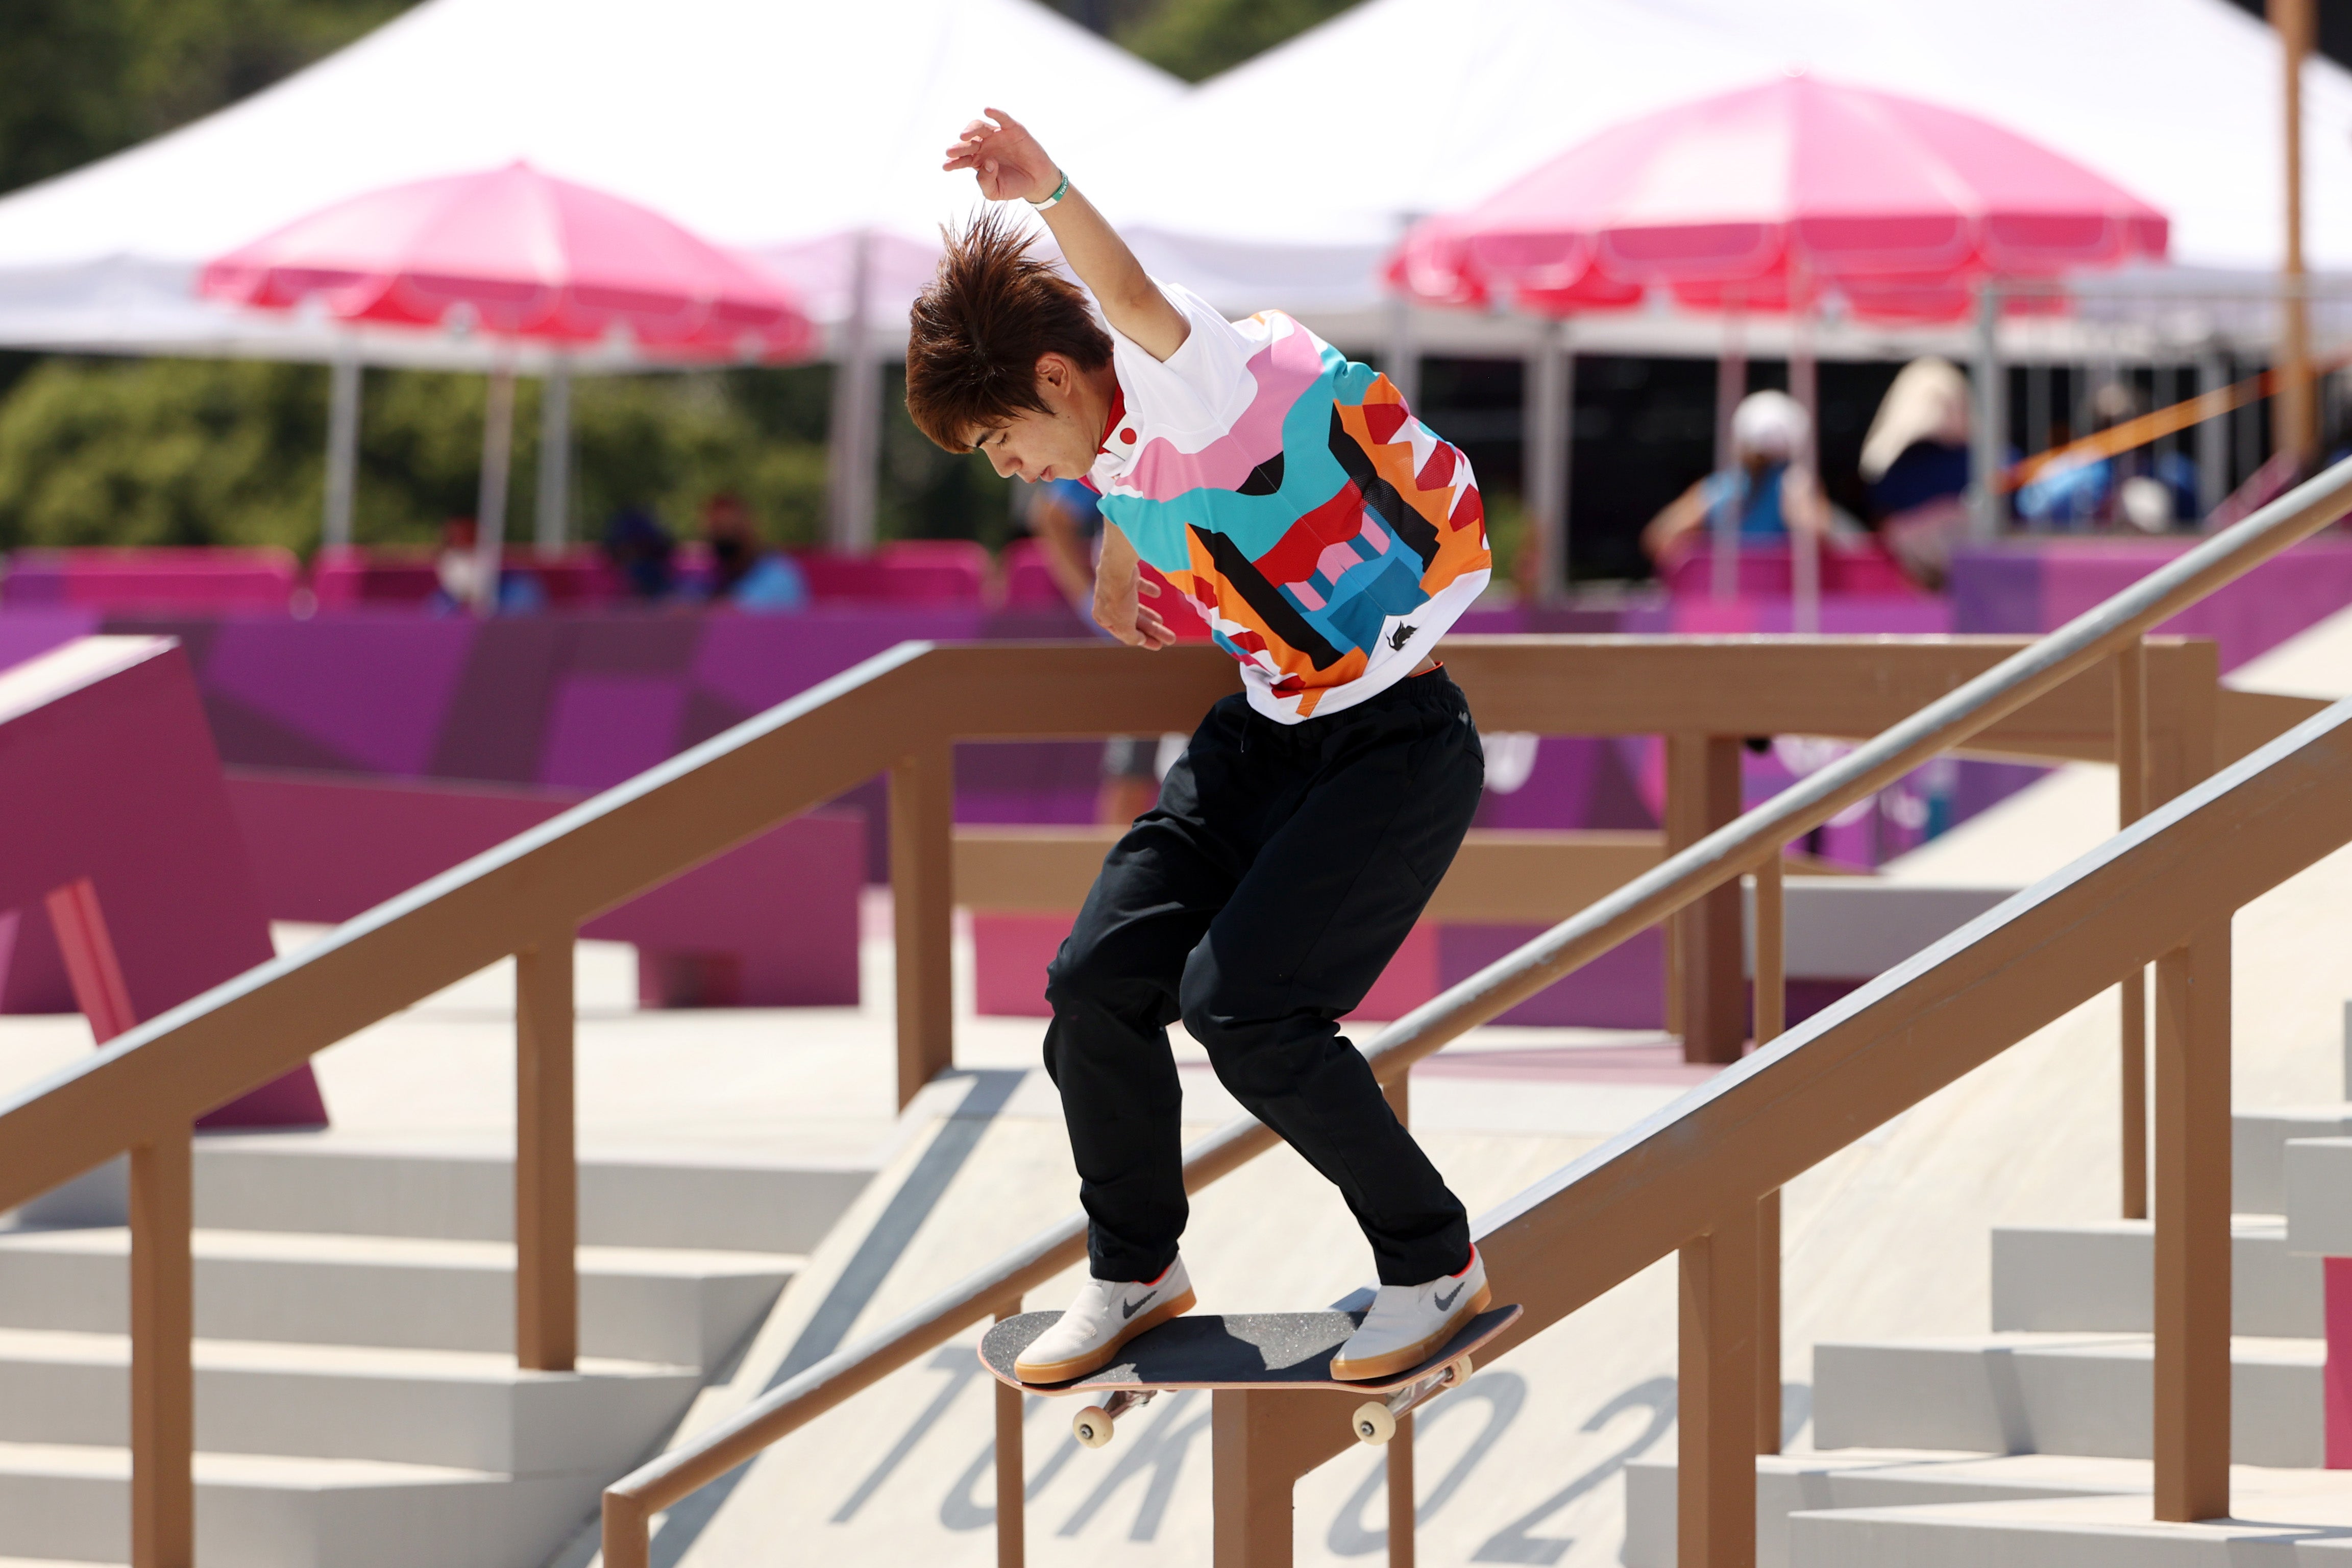 Yuto Horigome competes in the men’s street final